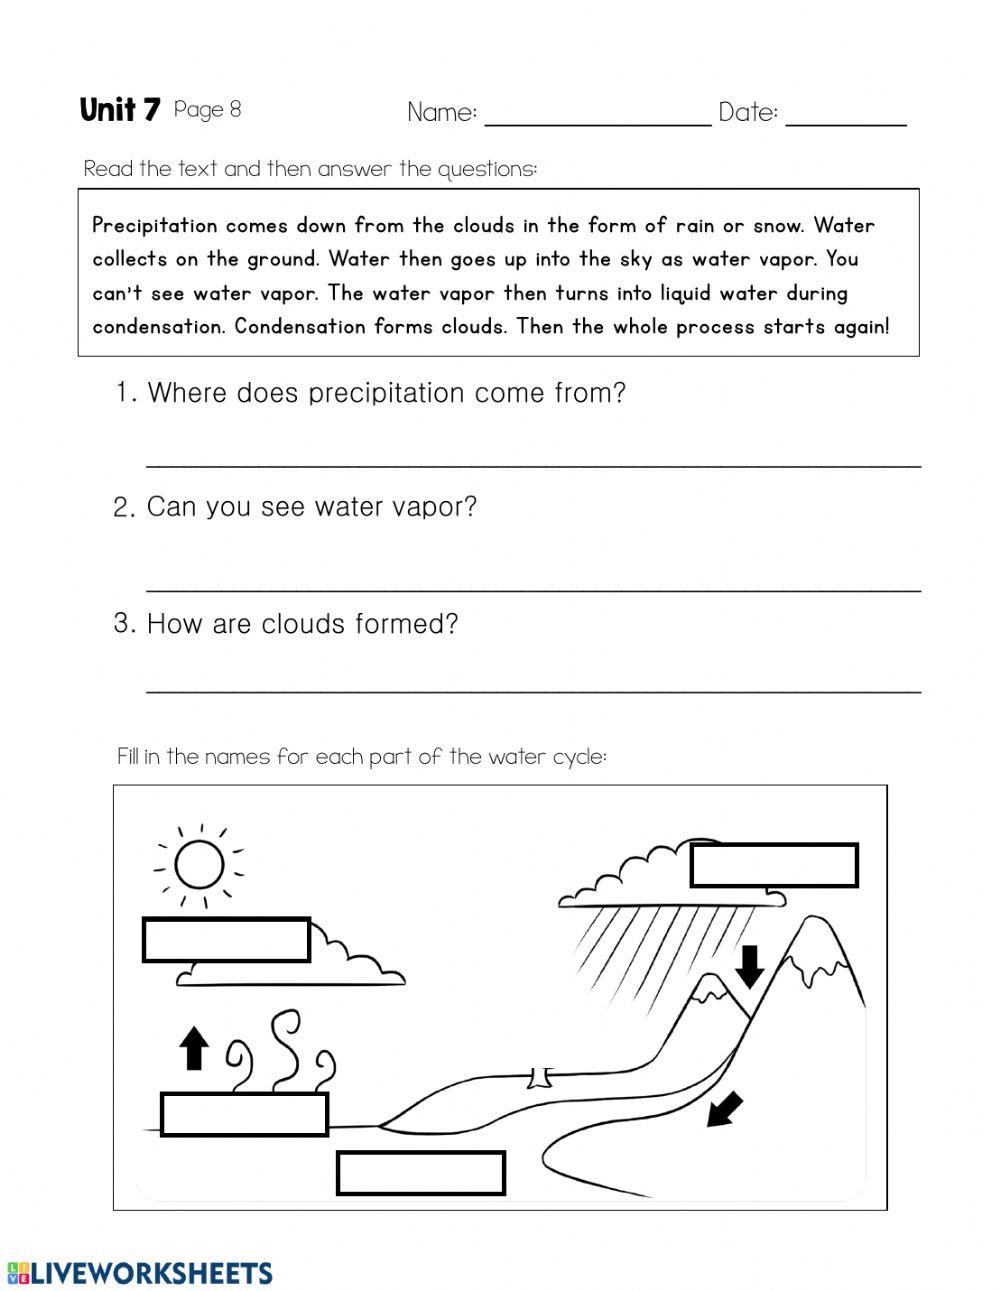 The Water Cycle - Day 3